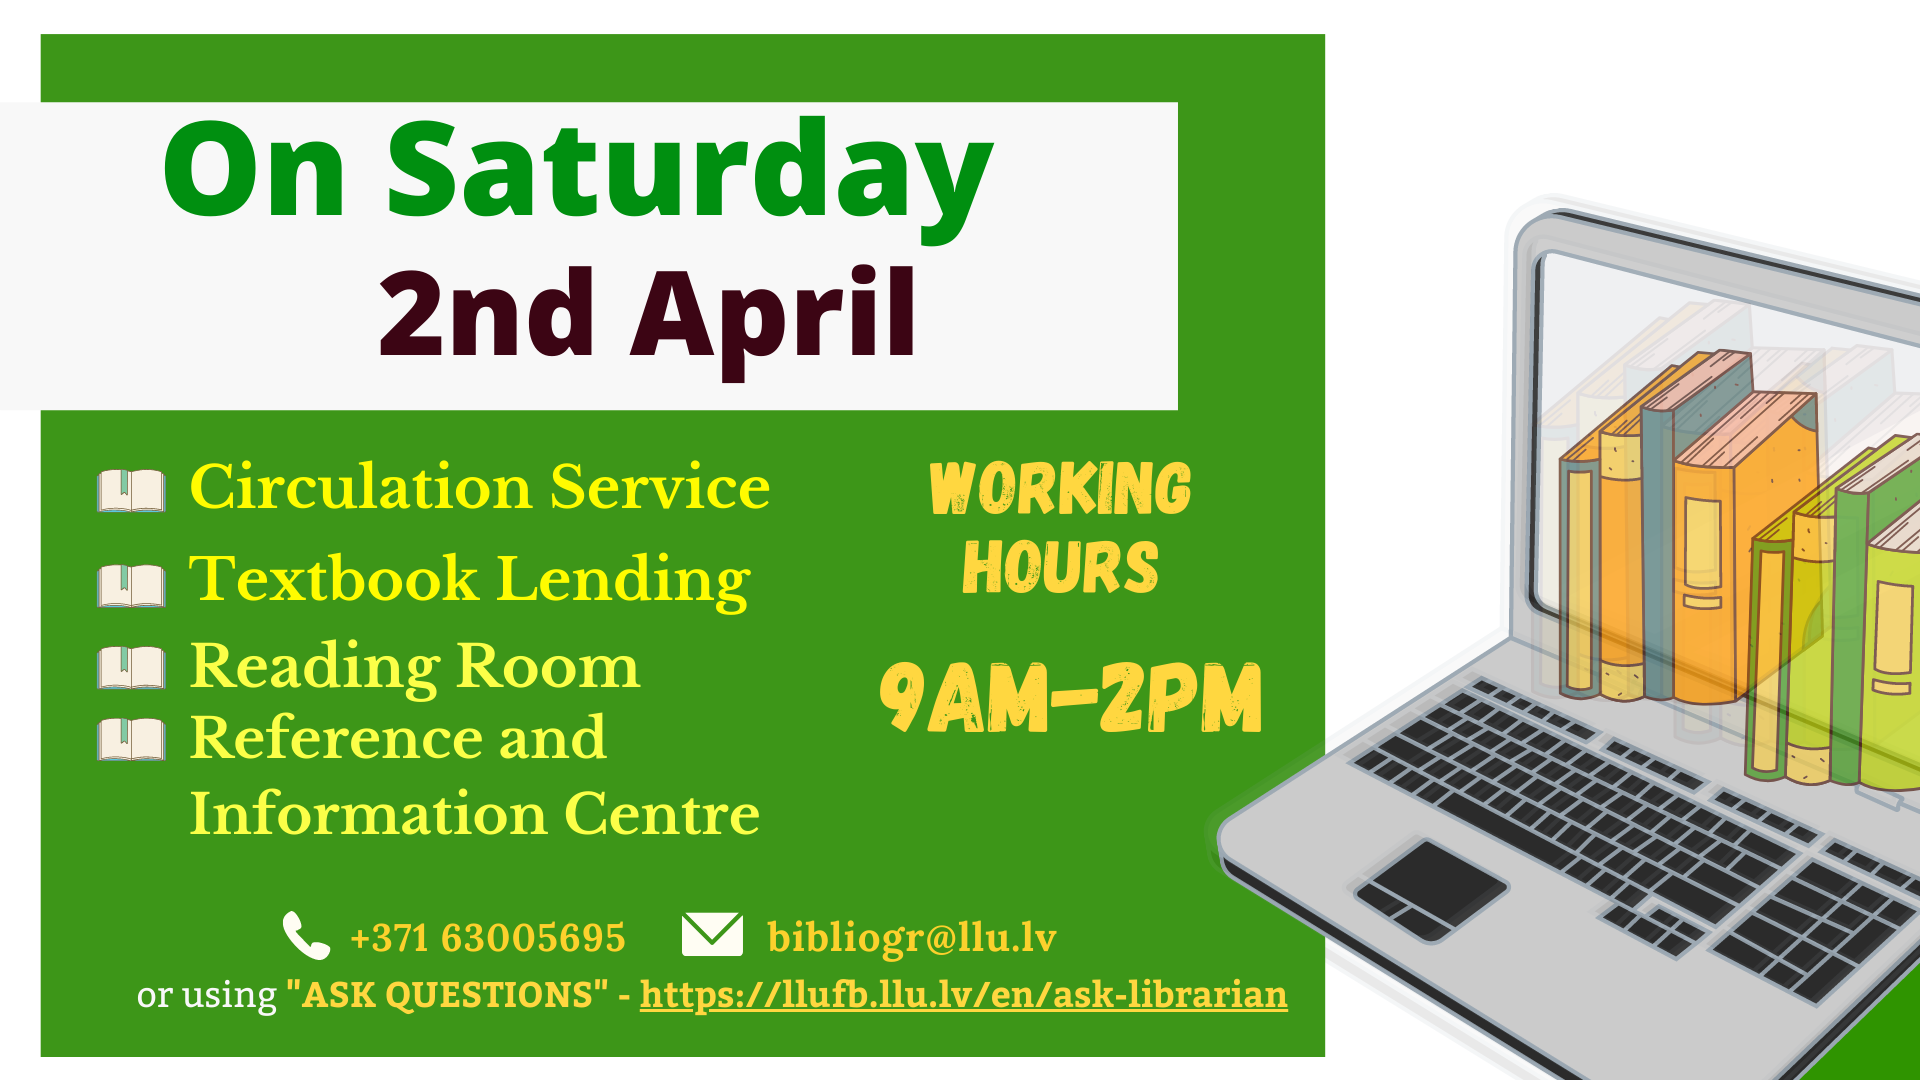 Library of the Latvia University of Life Sciences and Technologies on Saturday 2 April working hours 9am-2pm